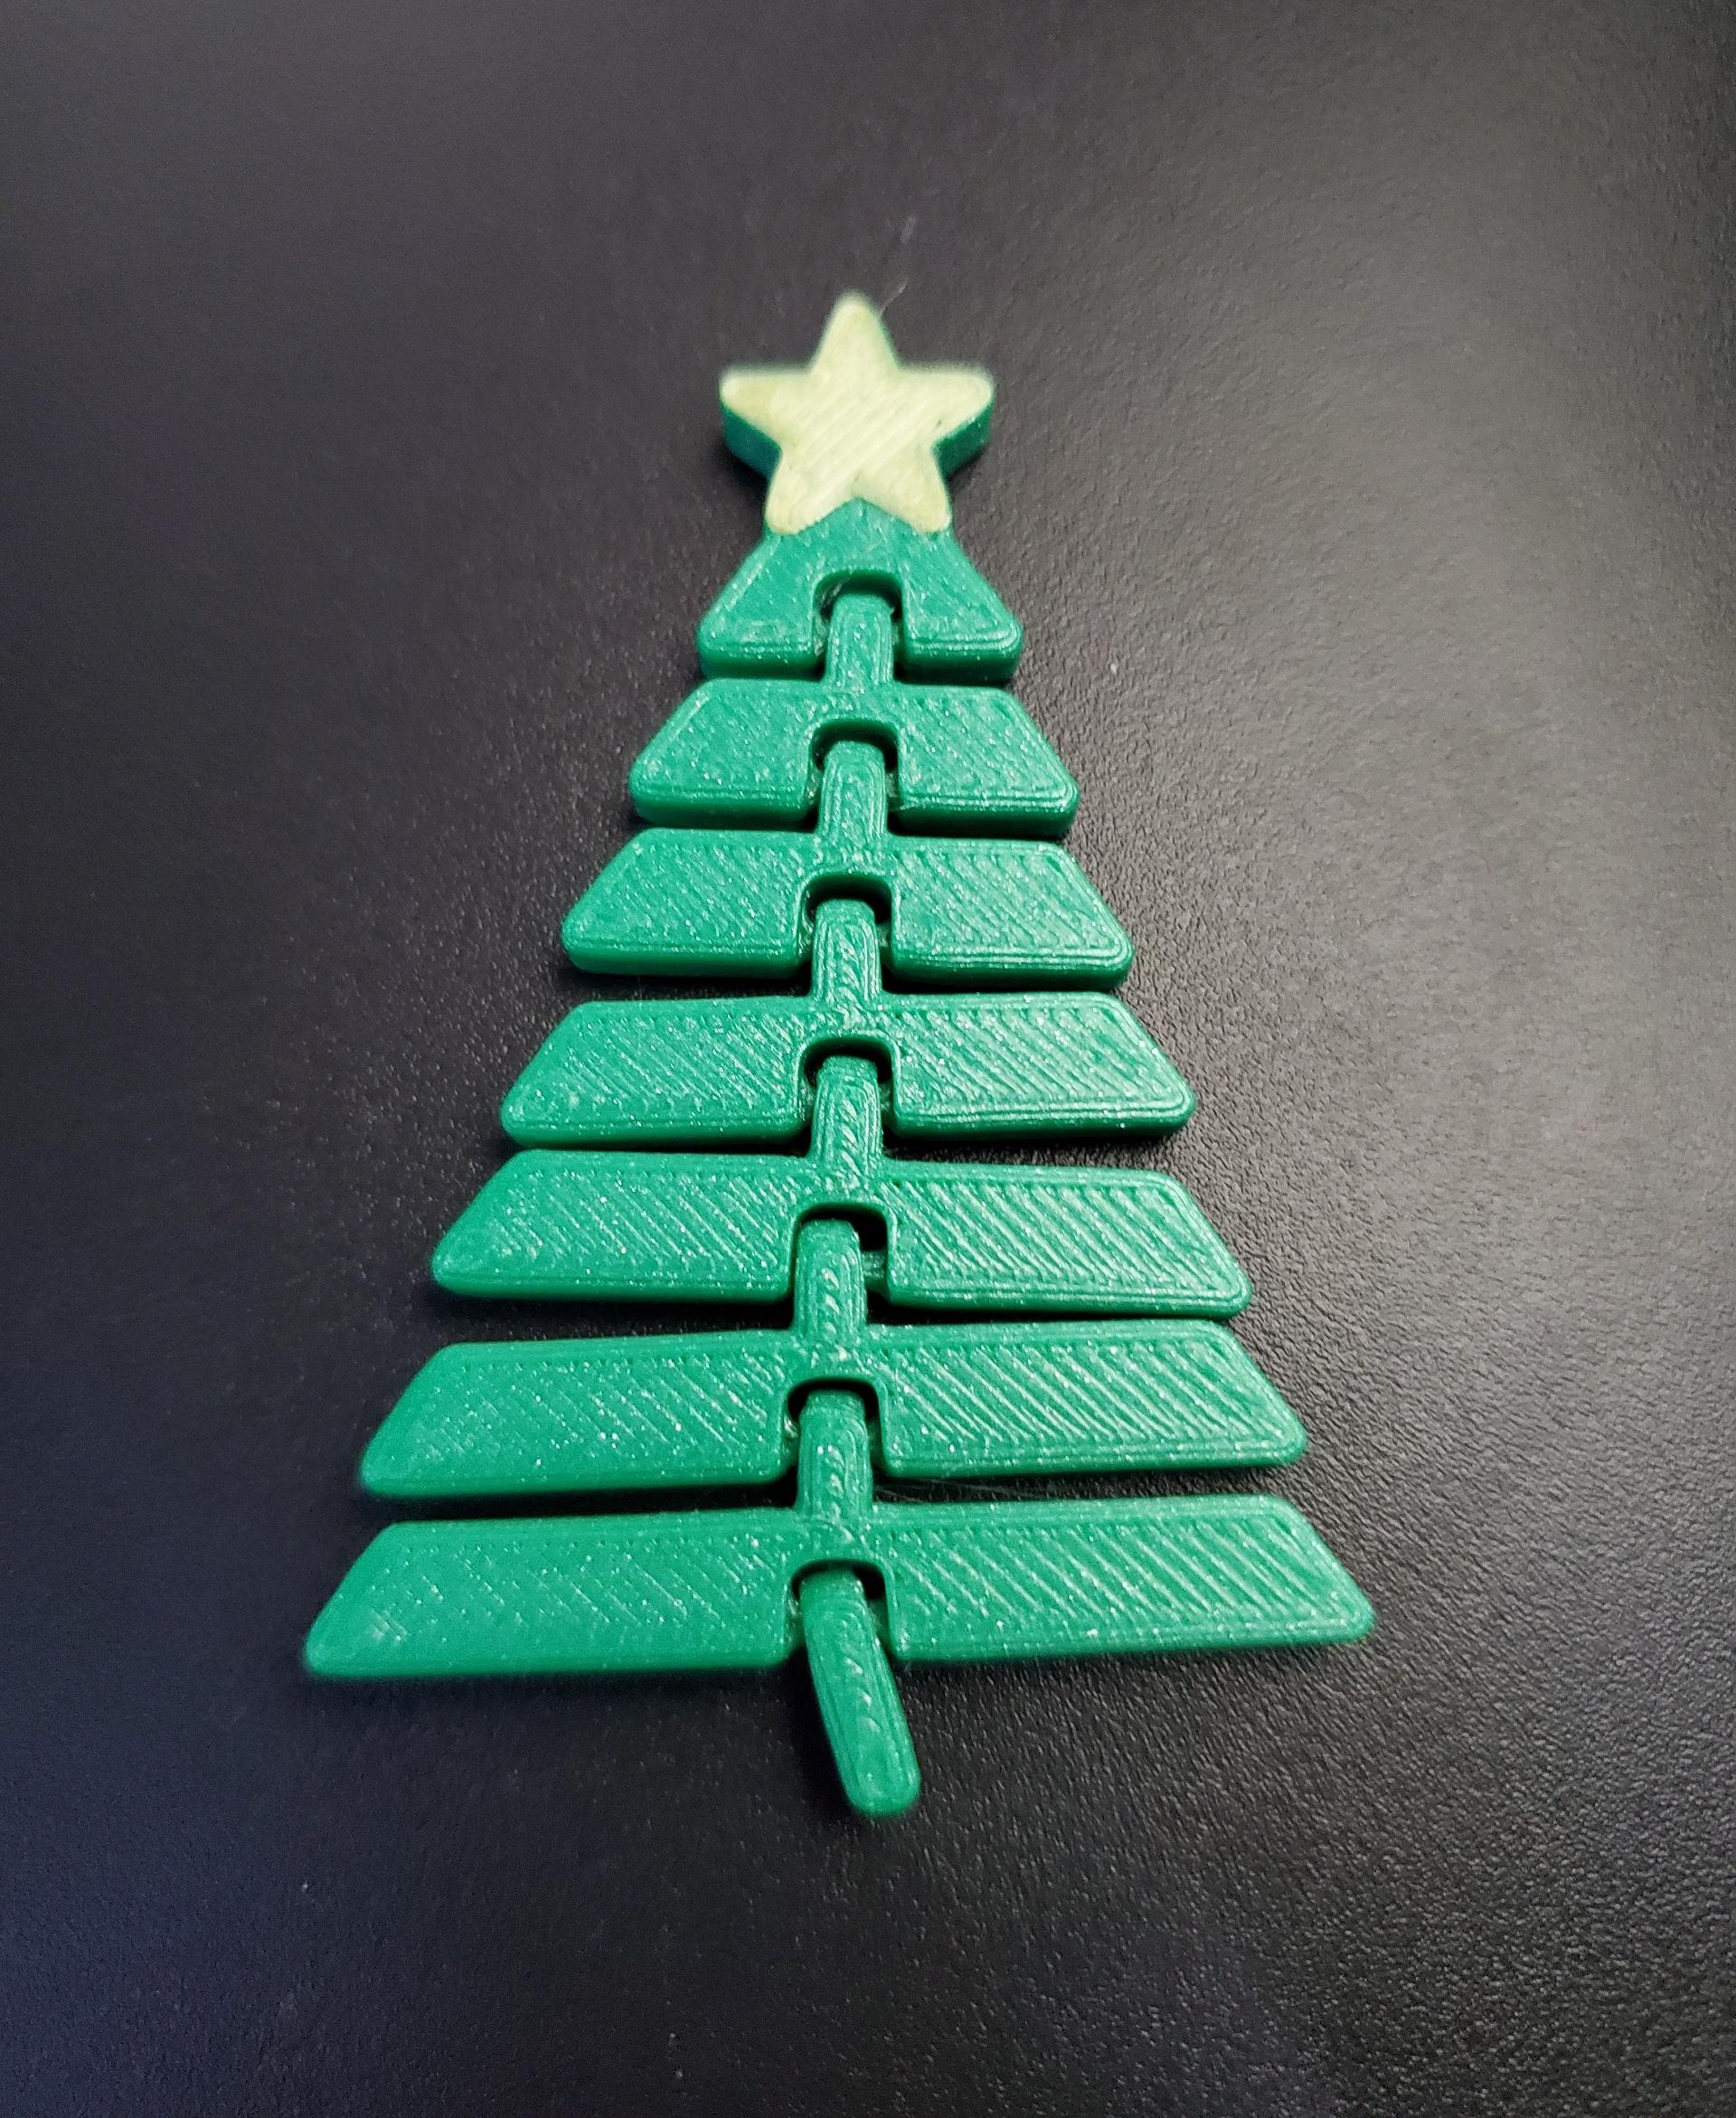 Articulated Christmas Tree with Star - Print in place fidget toy - 3mf - polymaker green pla - 3d model